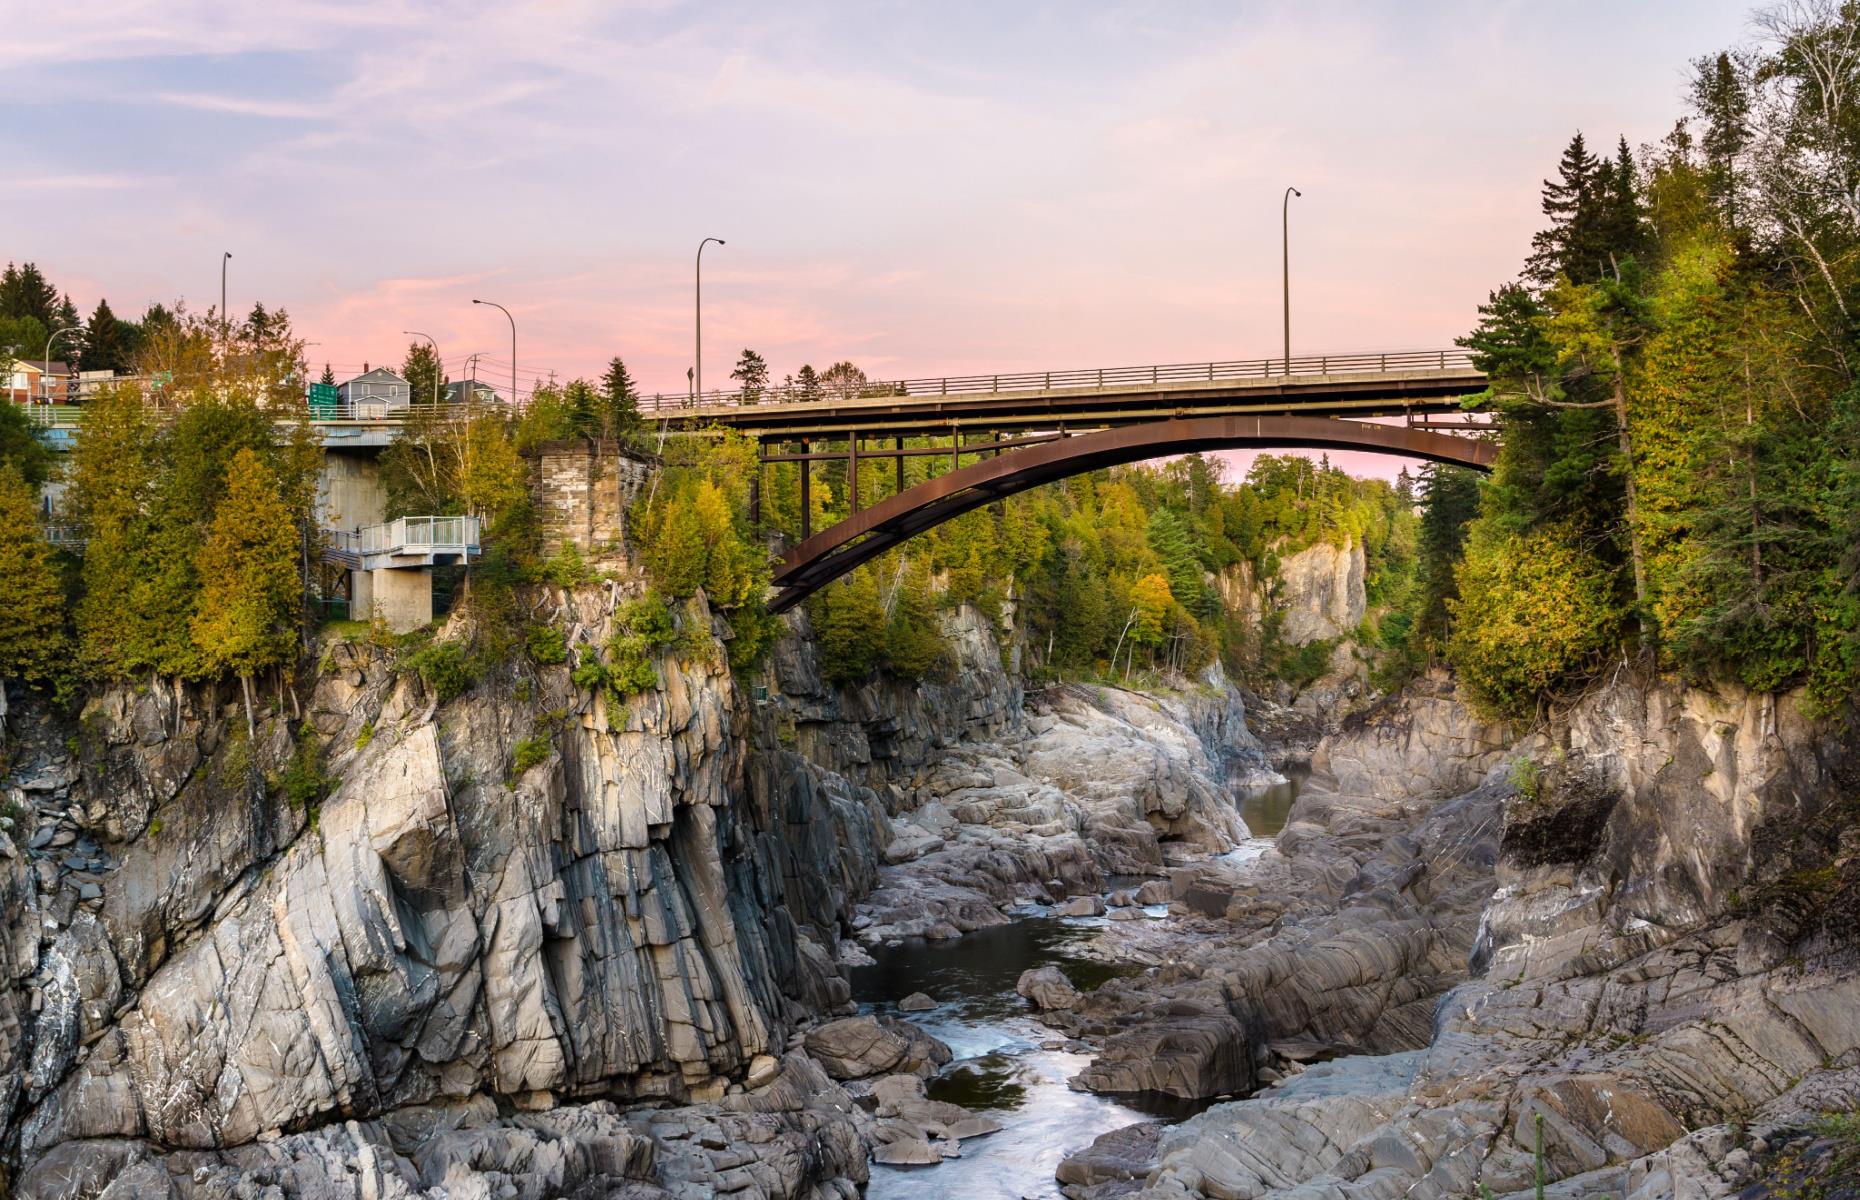 <p>Among the best-kept secrets in a province that feels like a well-kept secret itself, <a href="https://tourismnewbrunswick.ca/listing/grand-falls-gorge">Grand Falls Gorge</a> is a striking natural feature in northwest New Brunswick. Nature lovers can walk the mile-long (1.6km) trail along the edge of the gorge and thrill-seekers can get an even better view by zip-lining across it. A 400-step staircase leads down into the canyon for an even better vantage point.</p>